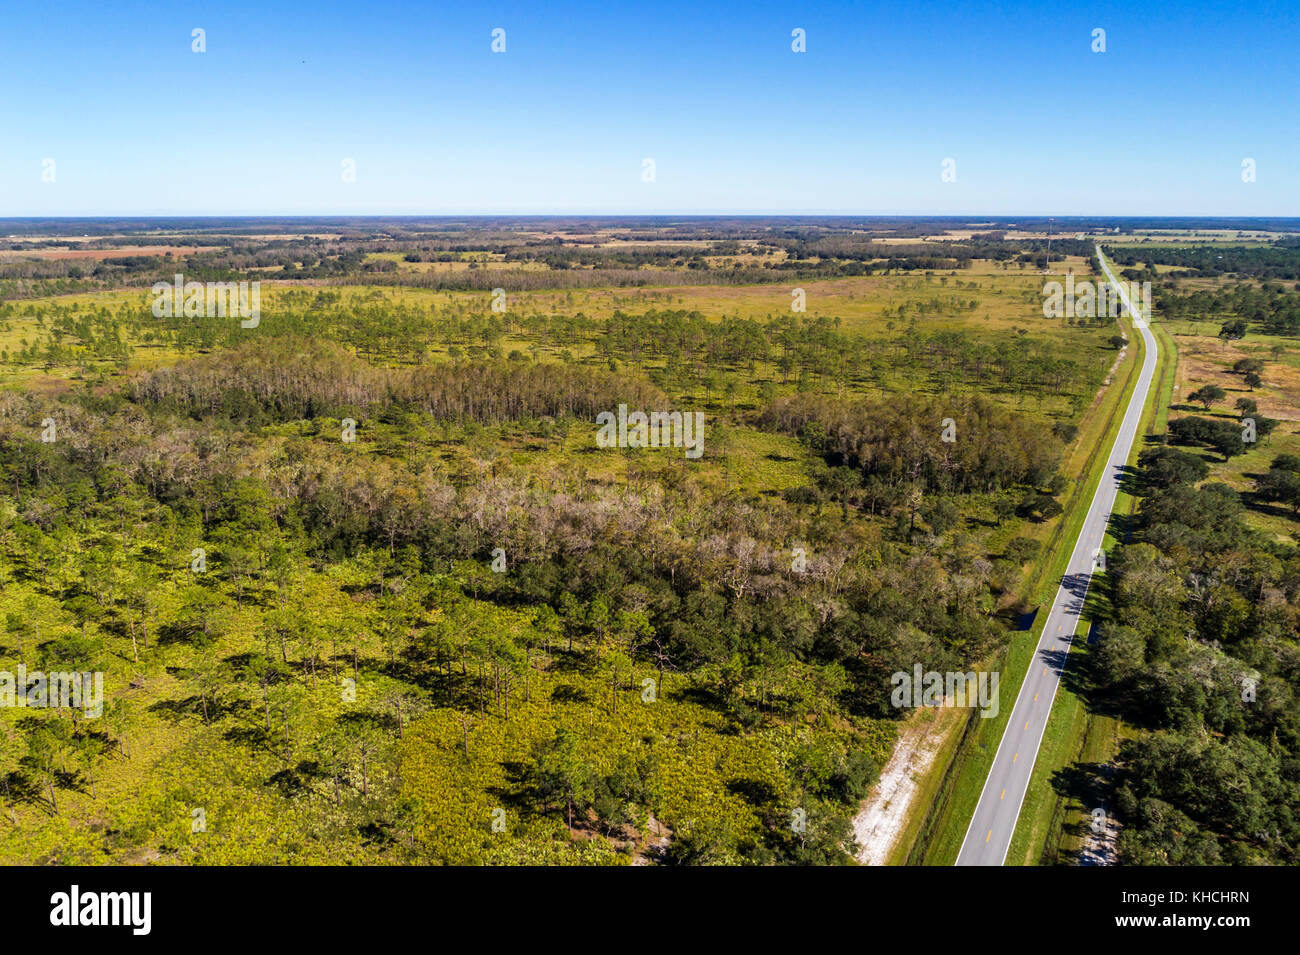 Florida,Kenansville,Lake Marian Highlands,Three Lakes Wildlife Management Area,State Road 523 highway,aerial overhead view,USA US United States Americ Stock Photo